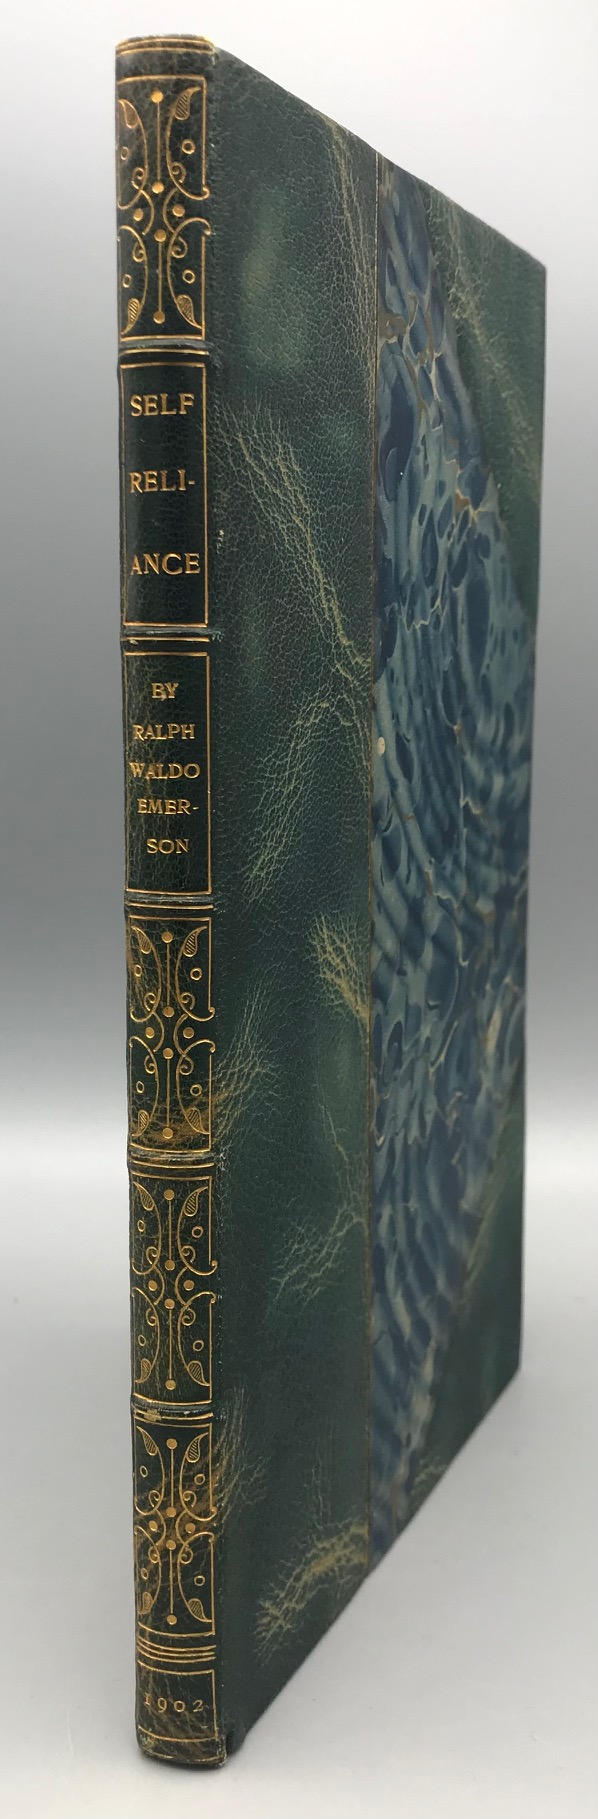 SELF-RELIANCE, by Ralph Waldo Emerson - 1902 [Roycroft Press Signed & Numbered]